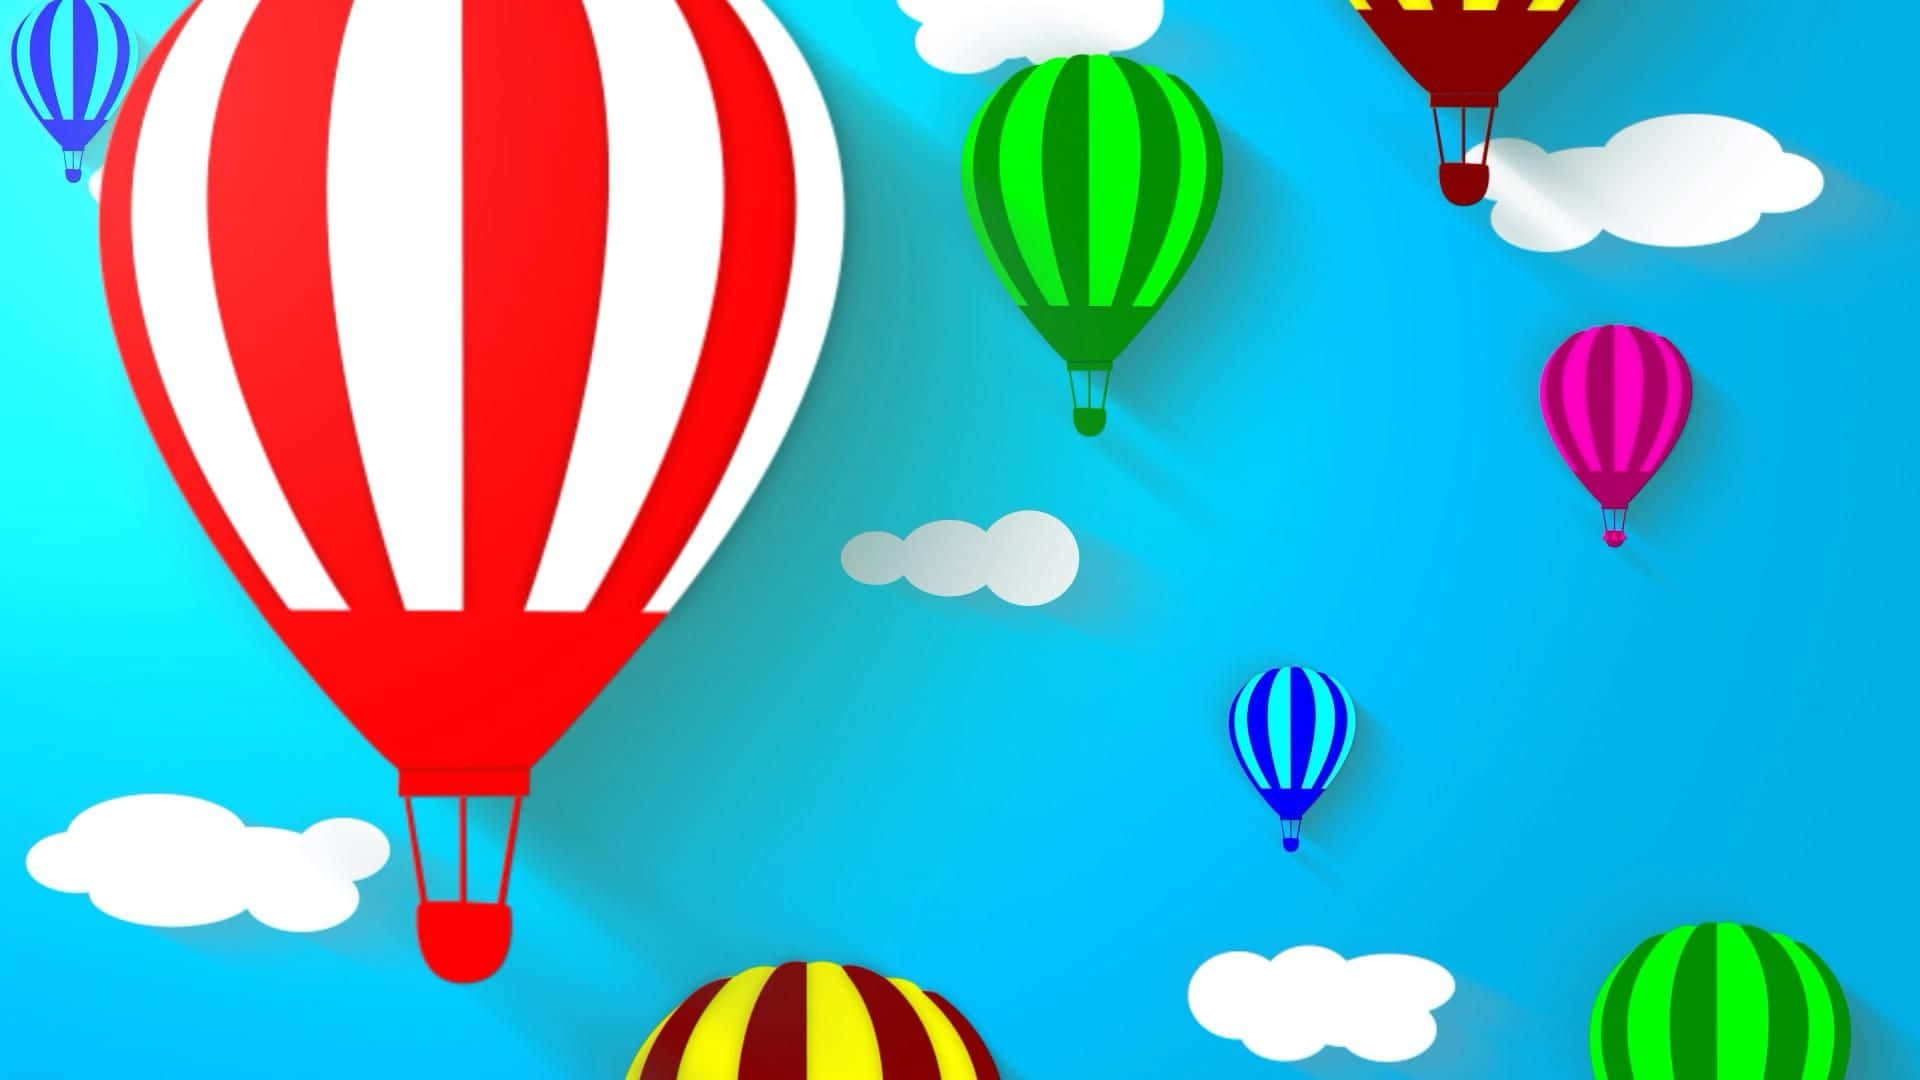 Hot Air Balloons Flying In The Sky